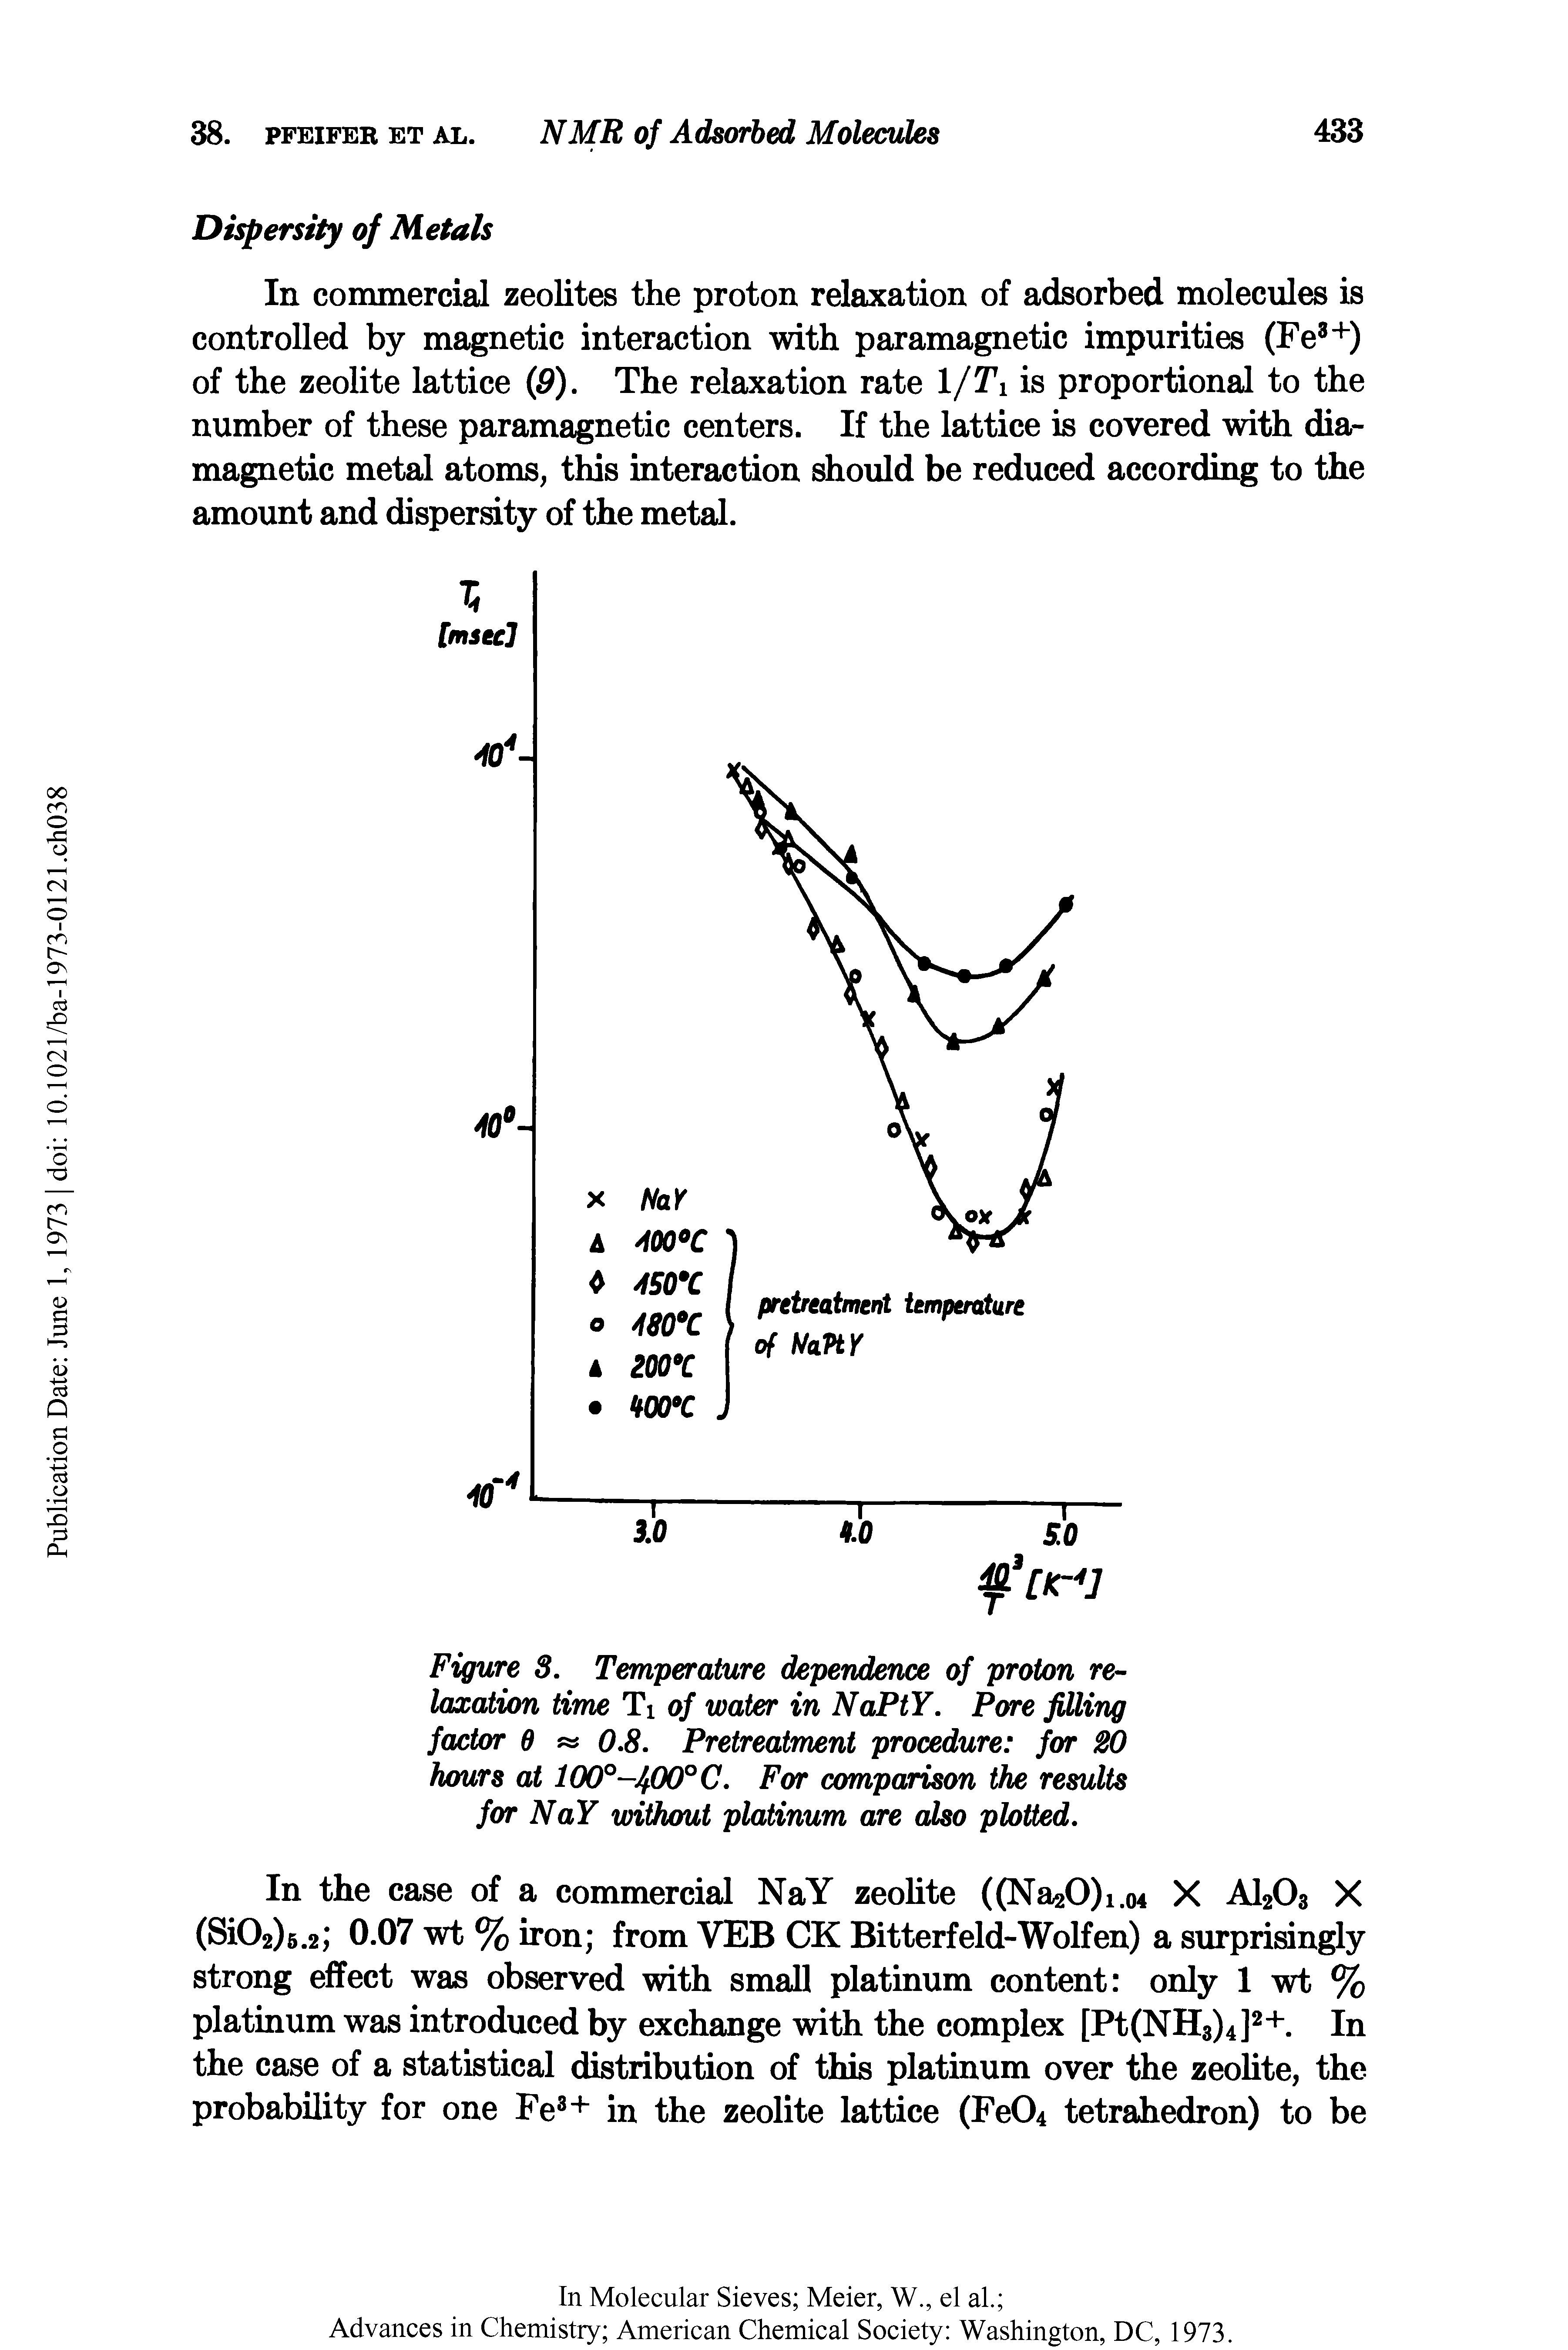 Figure 3. Temperature dependence of proton relaxation time Ti of water in NaPtY. Pore filling factor 6 0.8. Pretreatment procedure for 20 hours at 100° Ifi0°C. For comparison the results for NaY without platinum are also plotted.